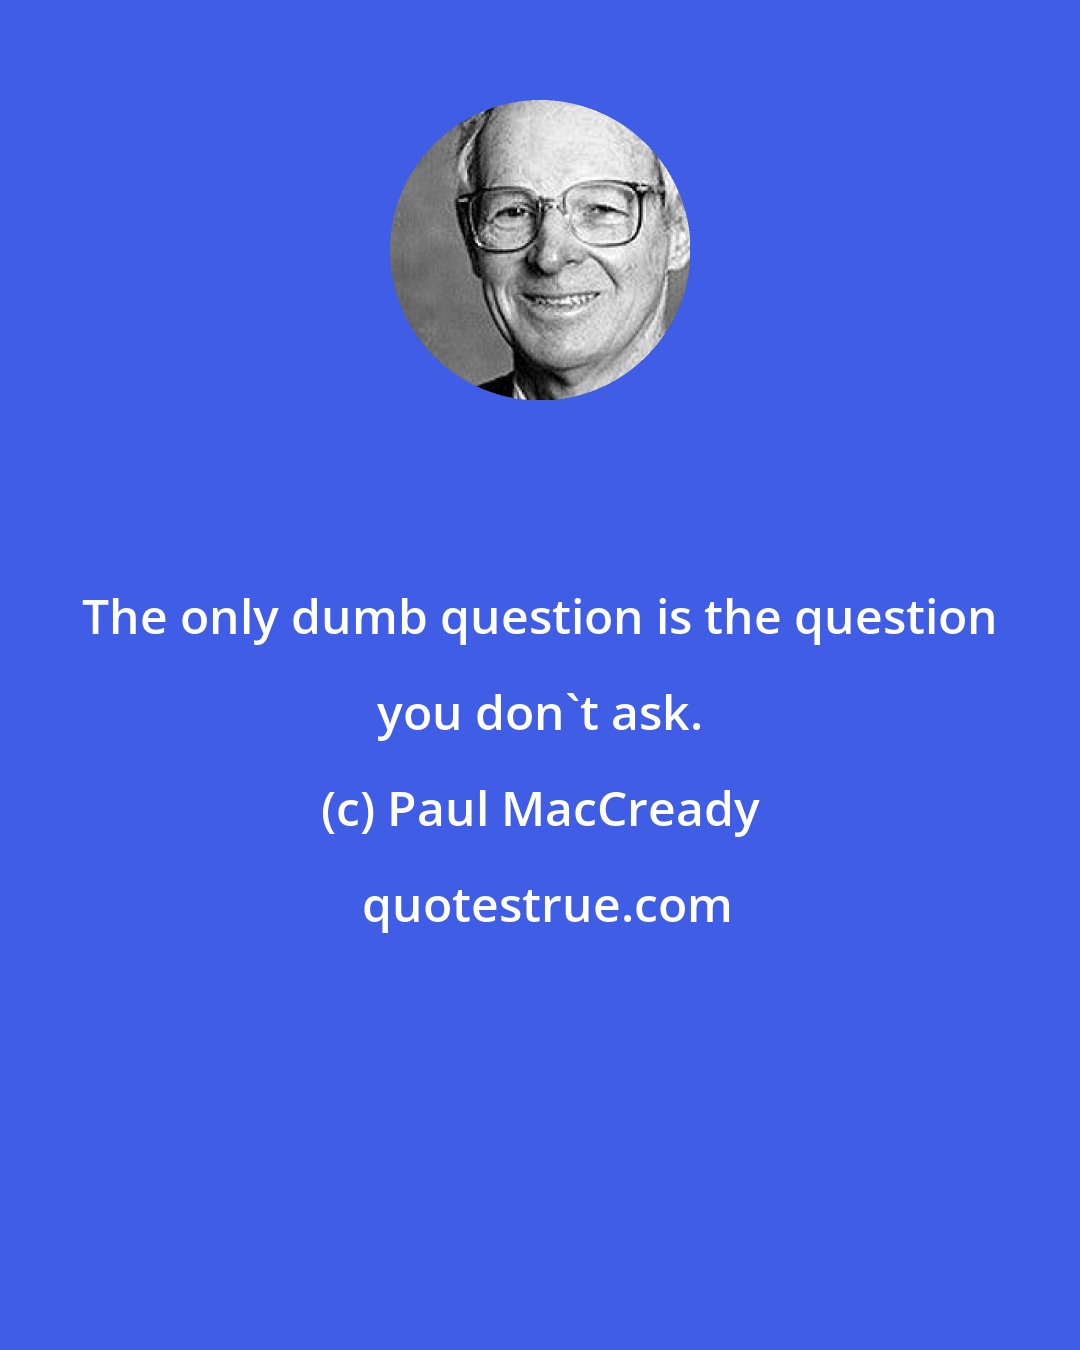 Paul MacCready: The only dumb question is the question you don't ask.